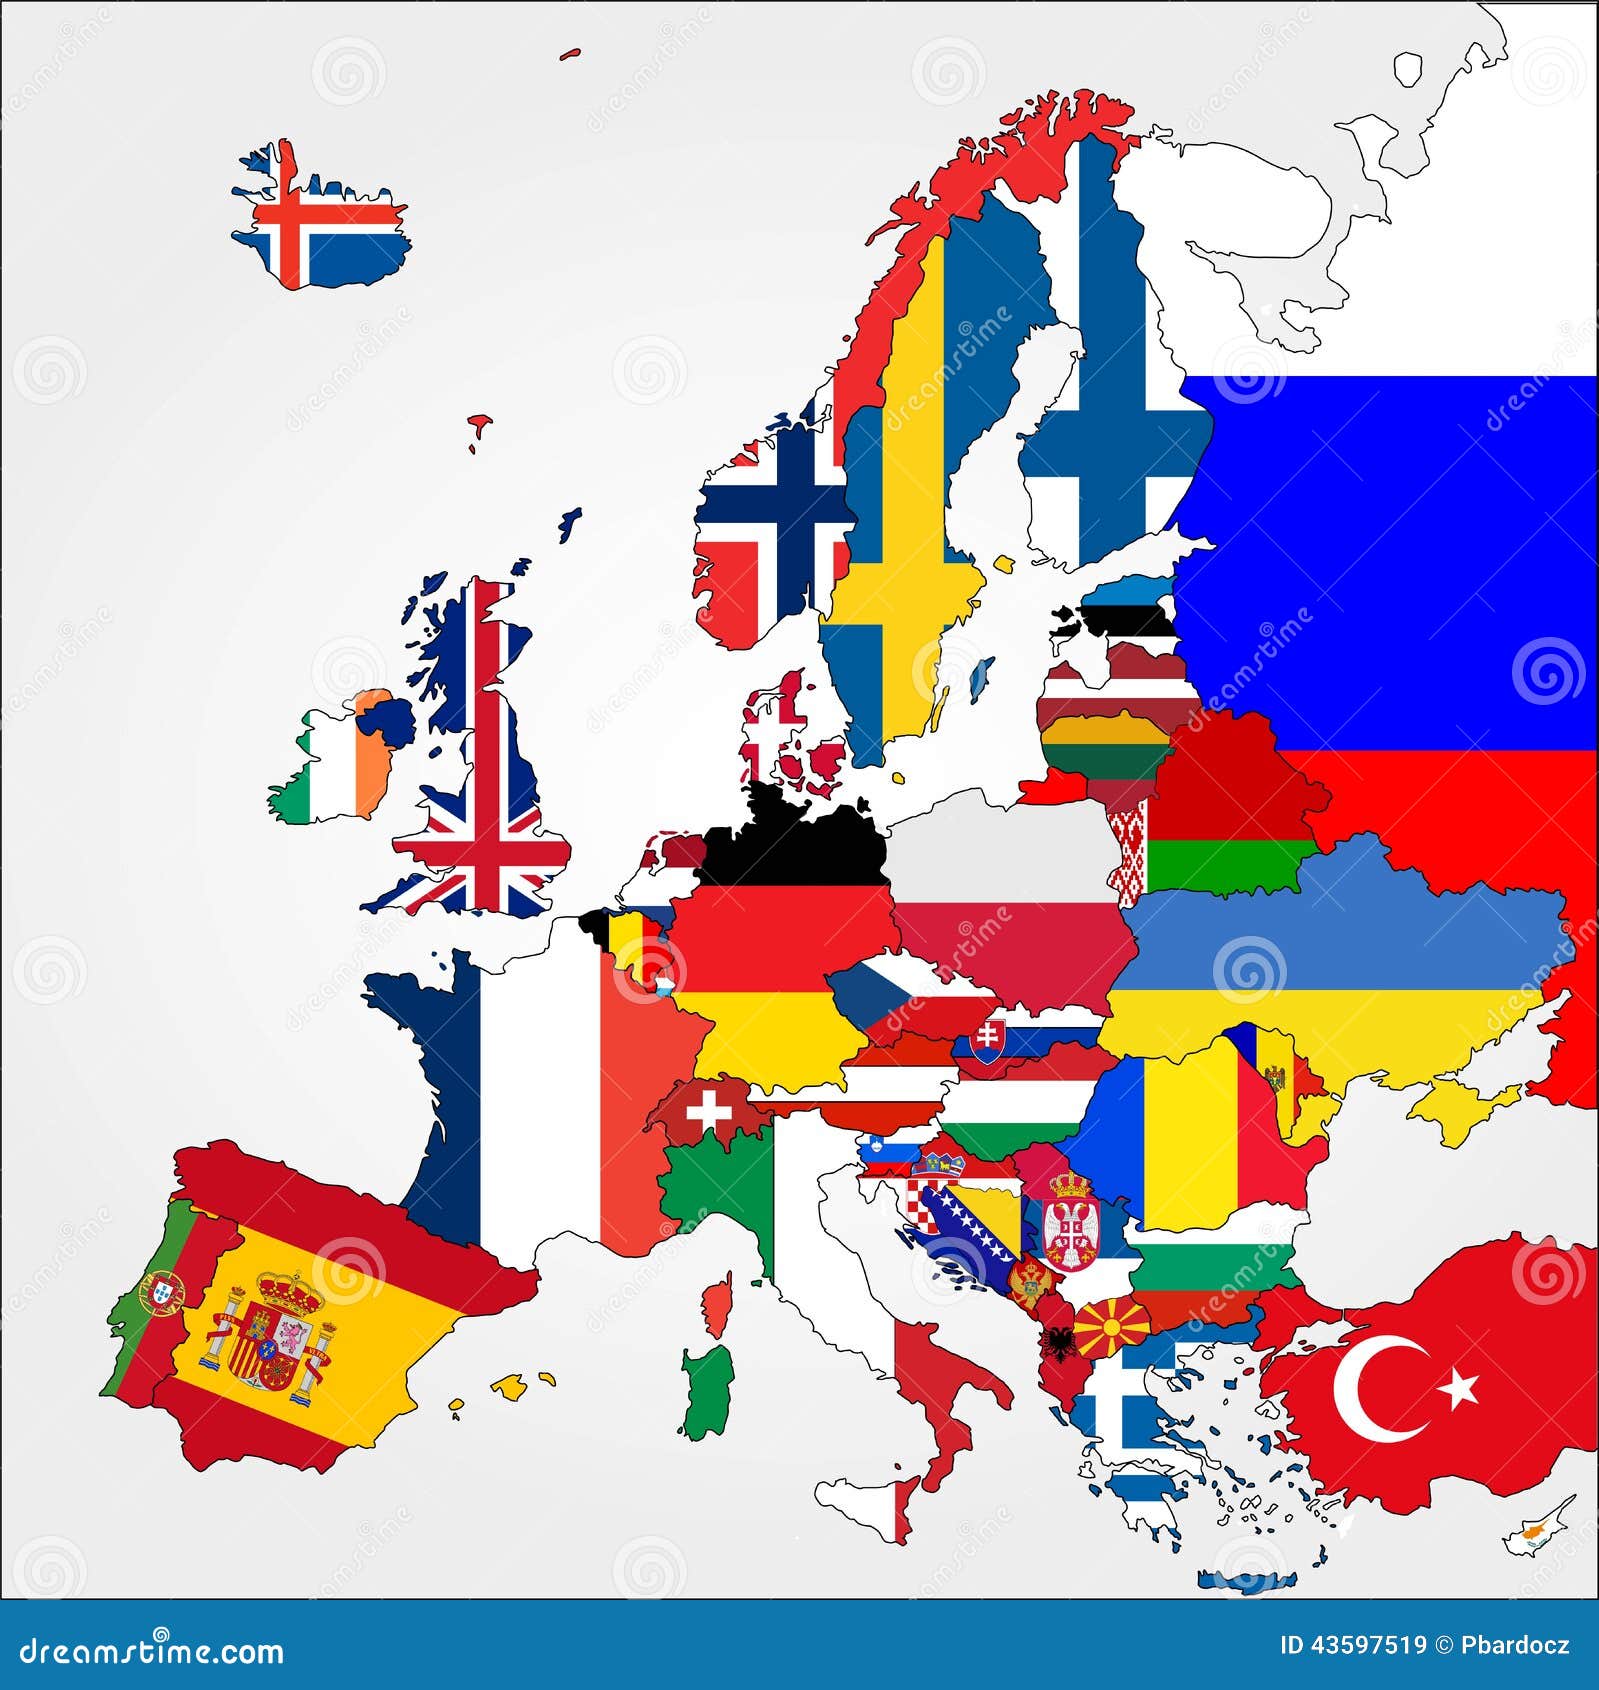 clipart europe flags - photo #39